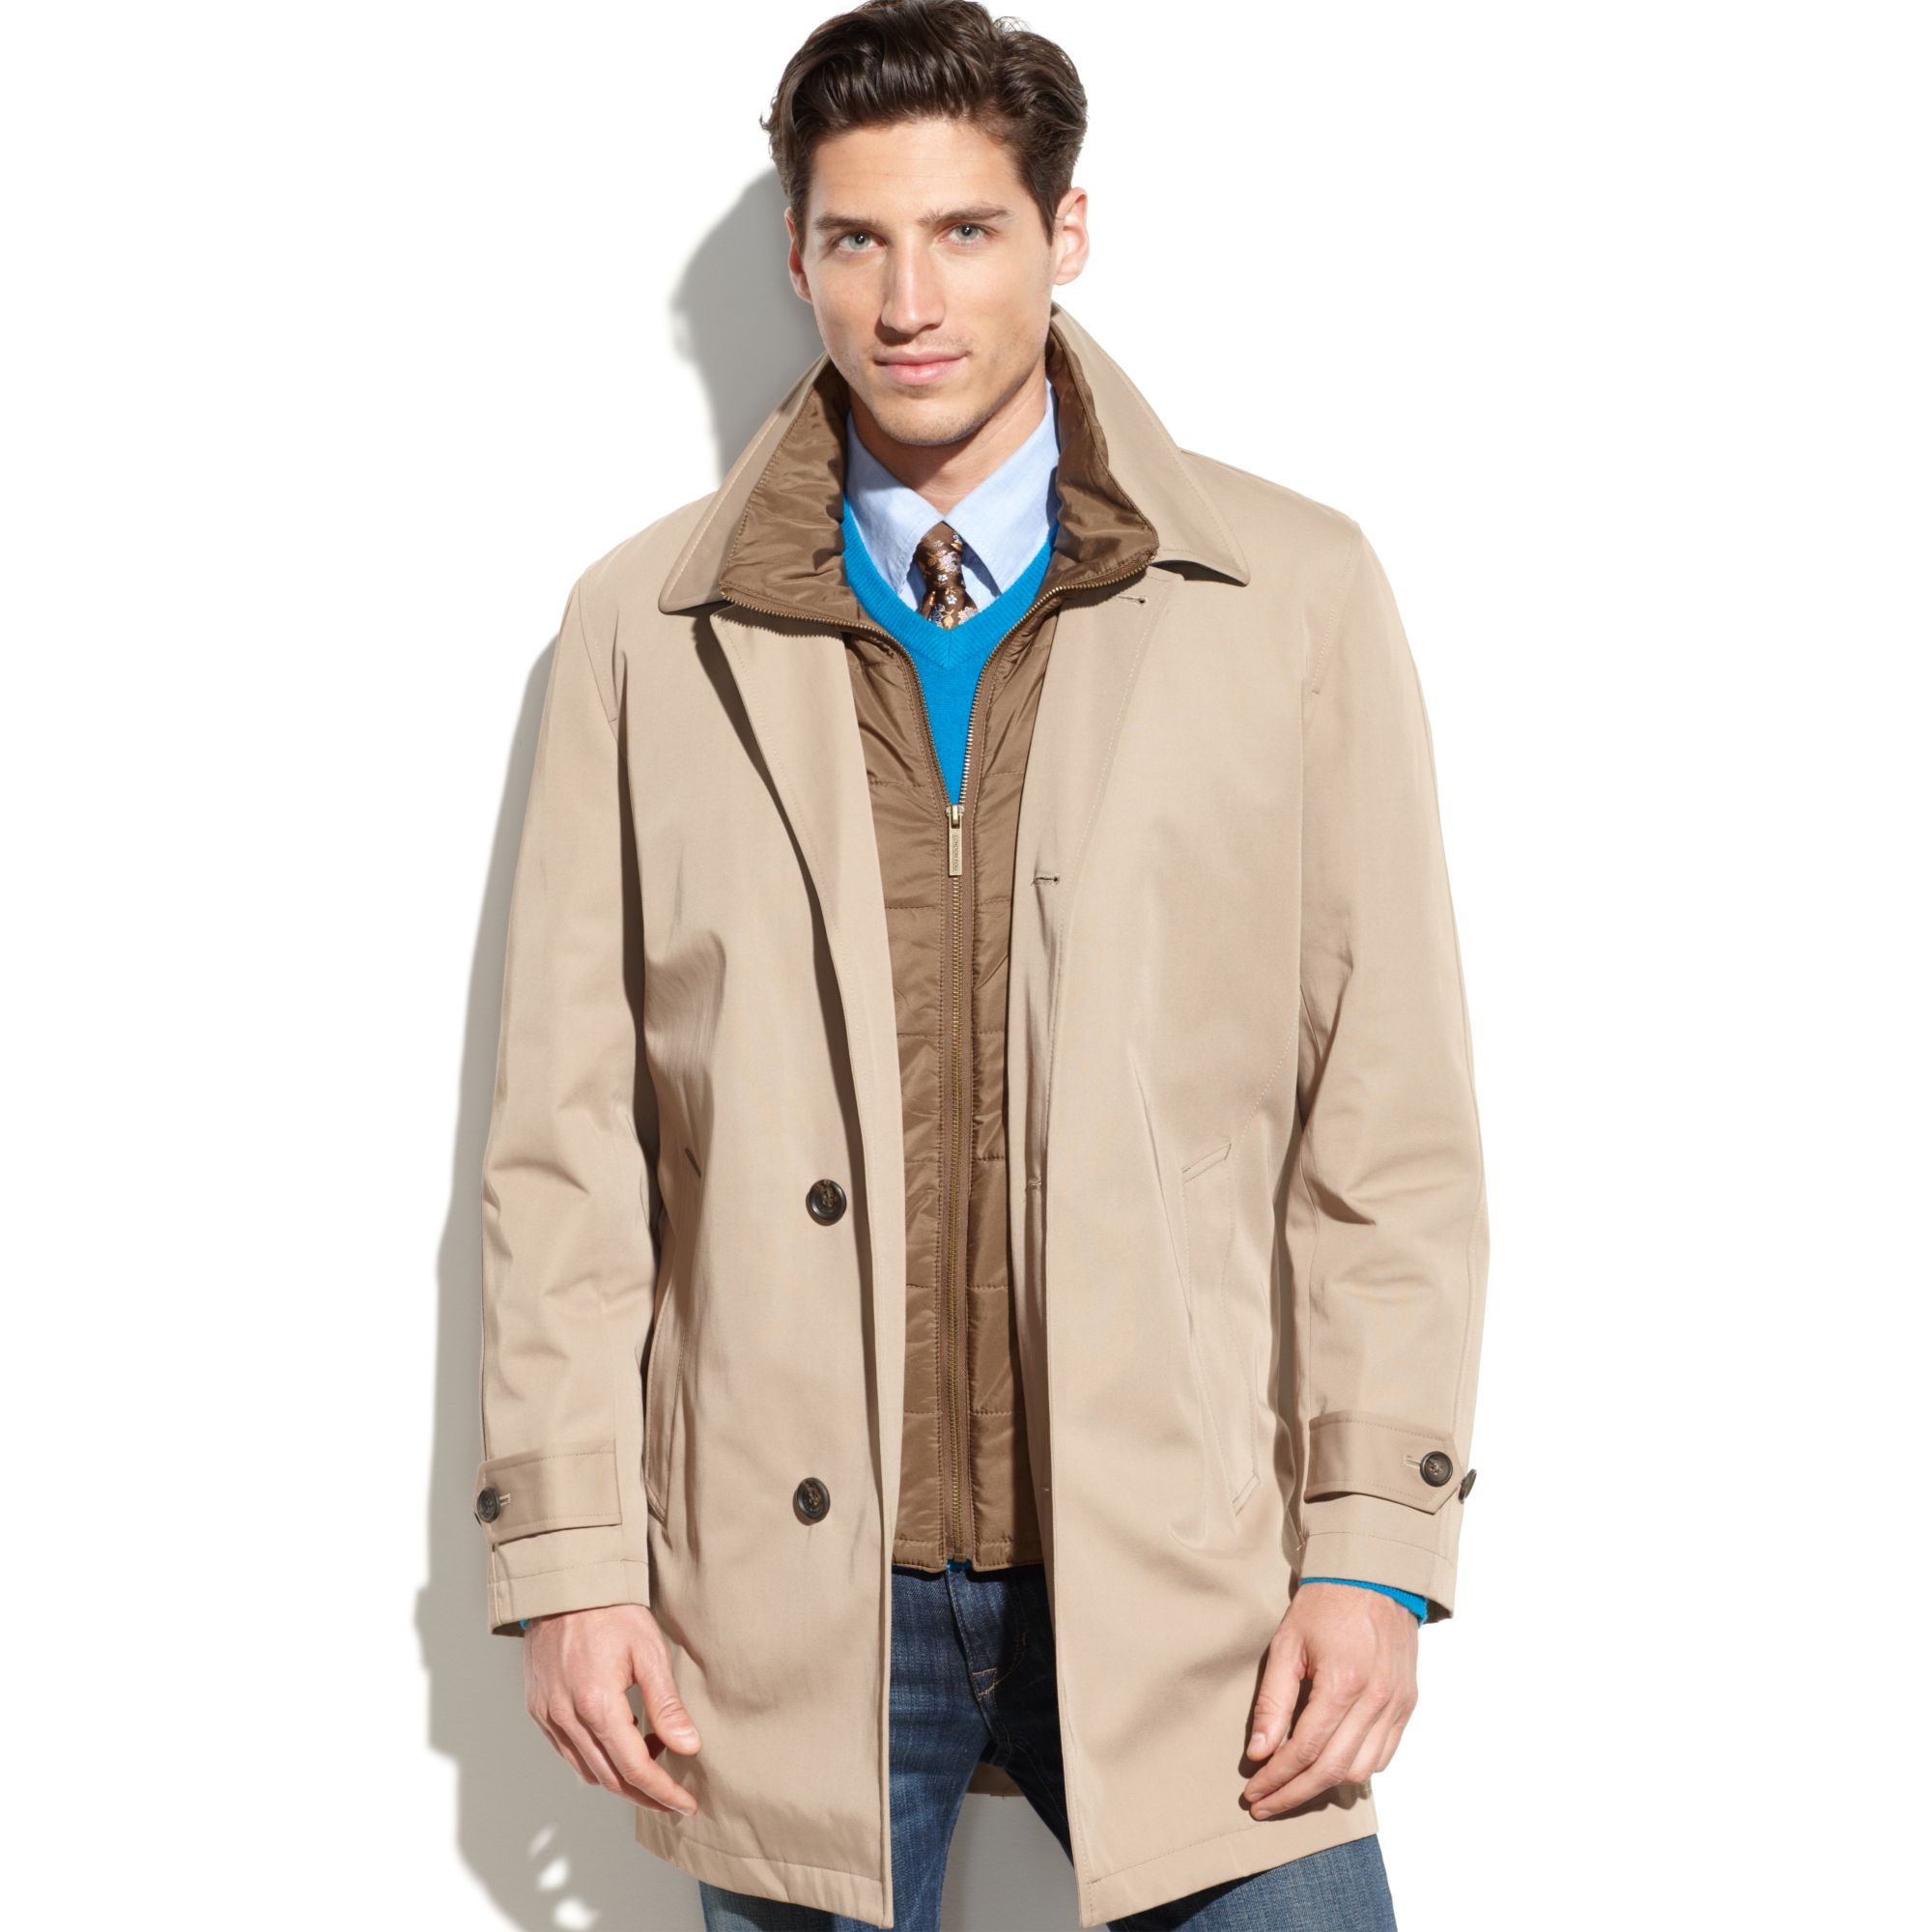 Lyst - London Fog Bailey All Weather Trench Coat in Natural for Men